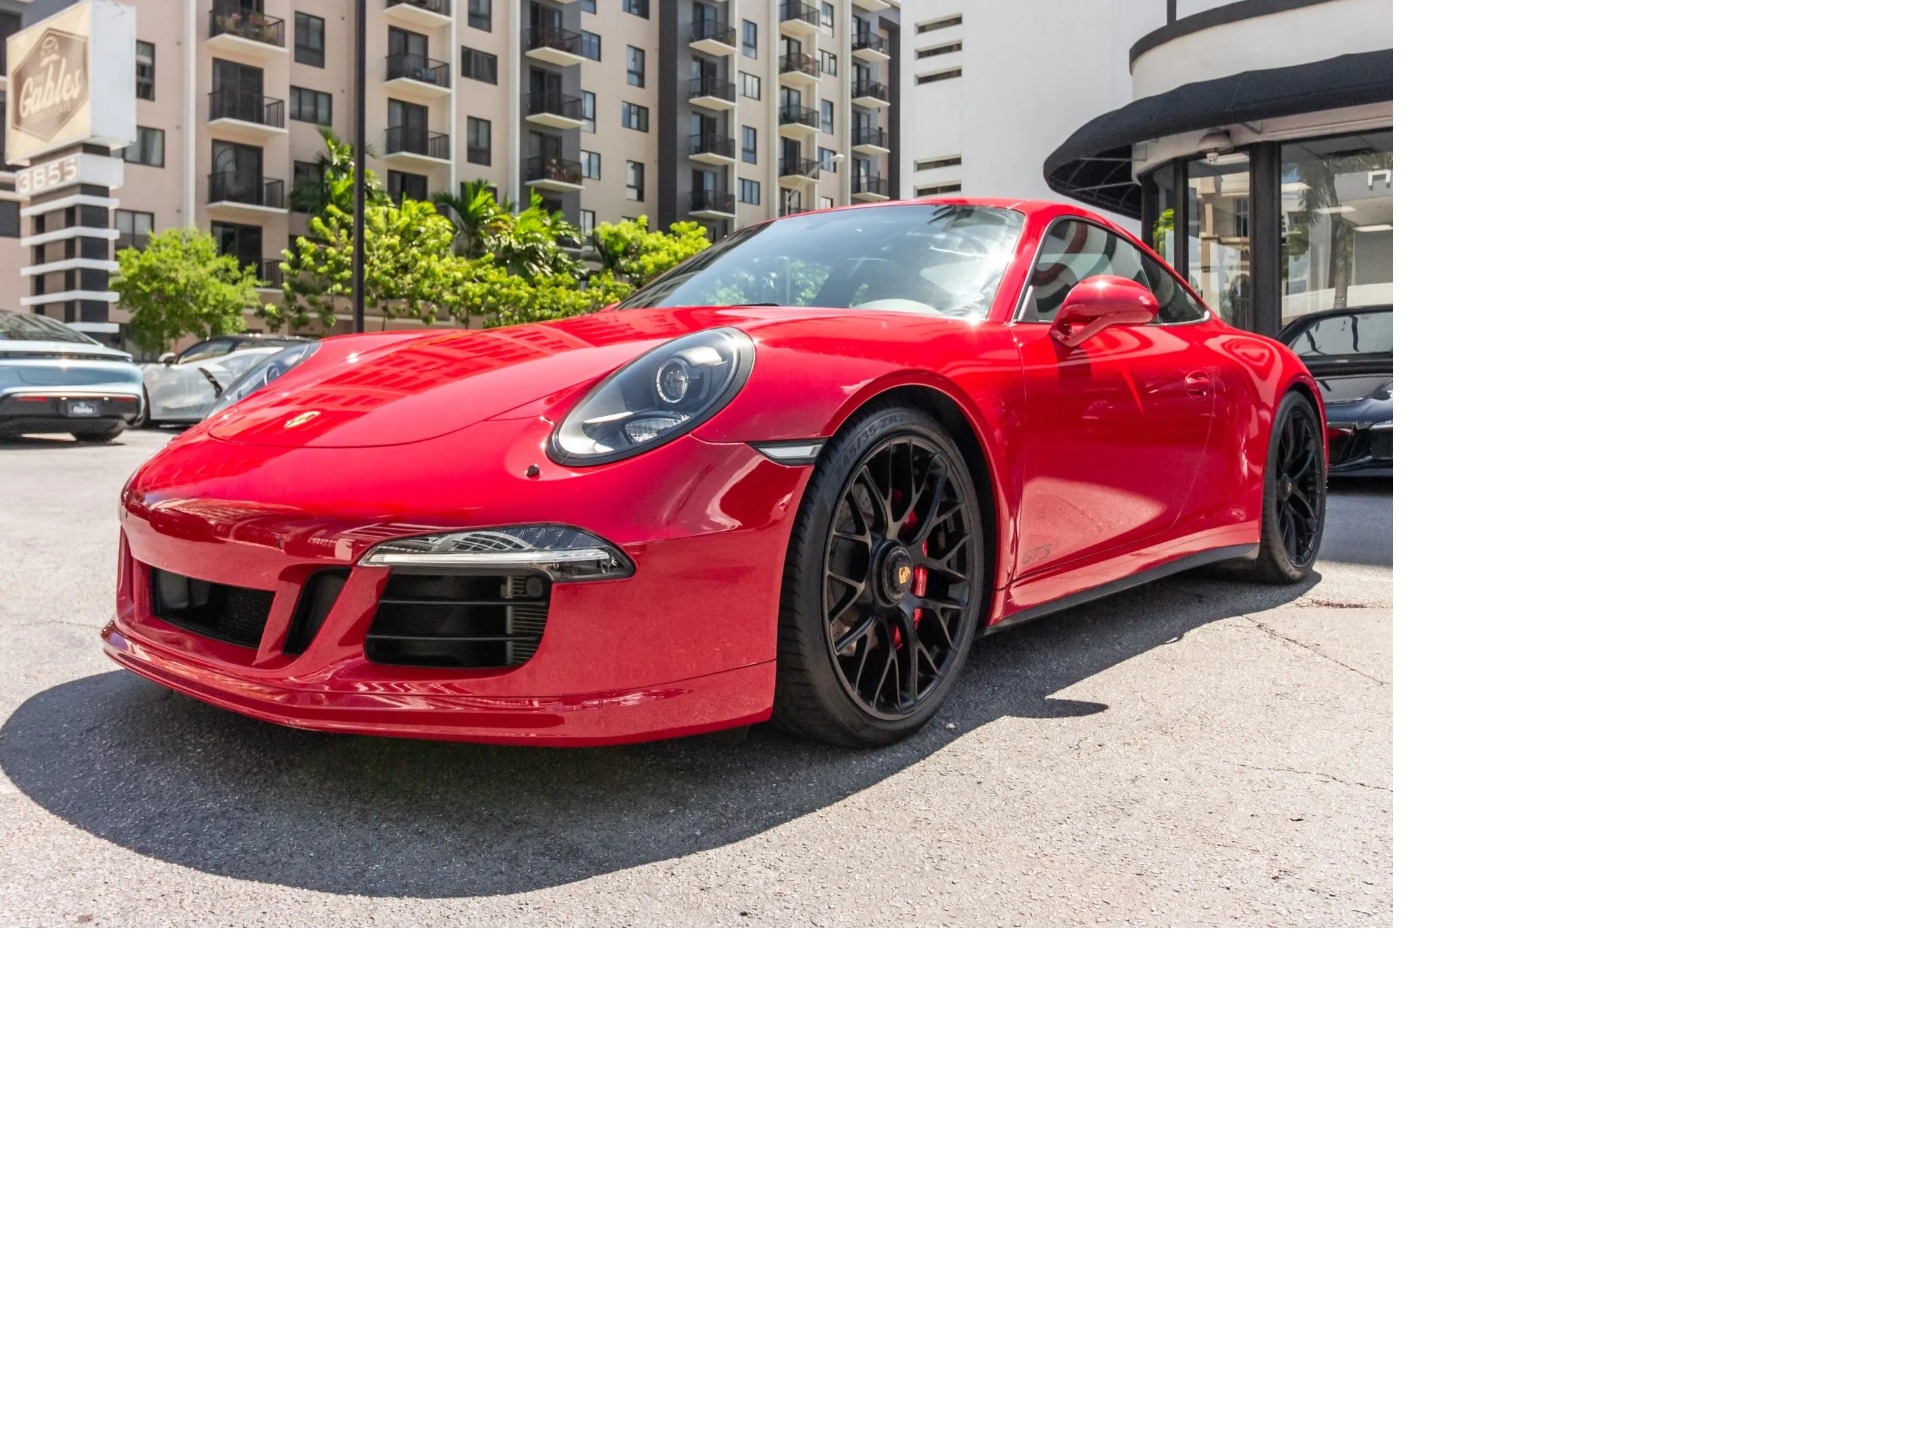 Used 2015 Porsche 911 Carrera GTS for sale Sold at The Gables Sports Cars in Miami FL 33146 2